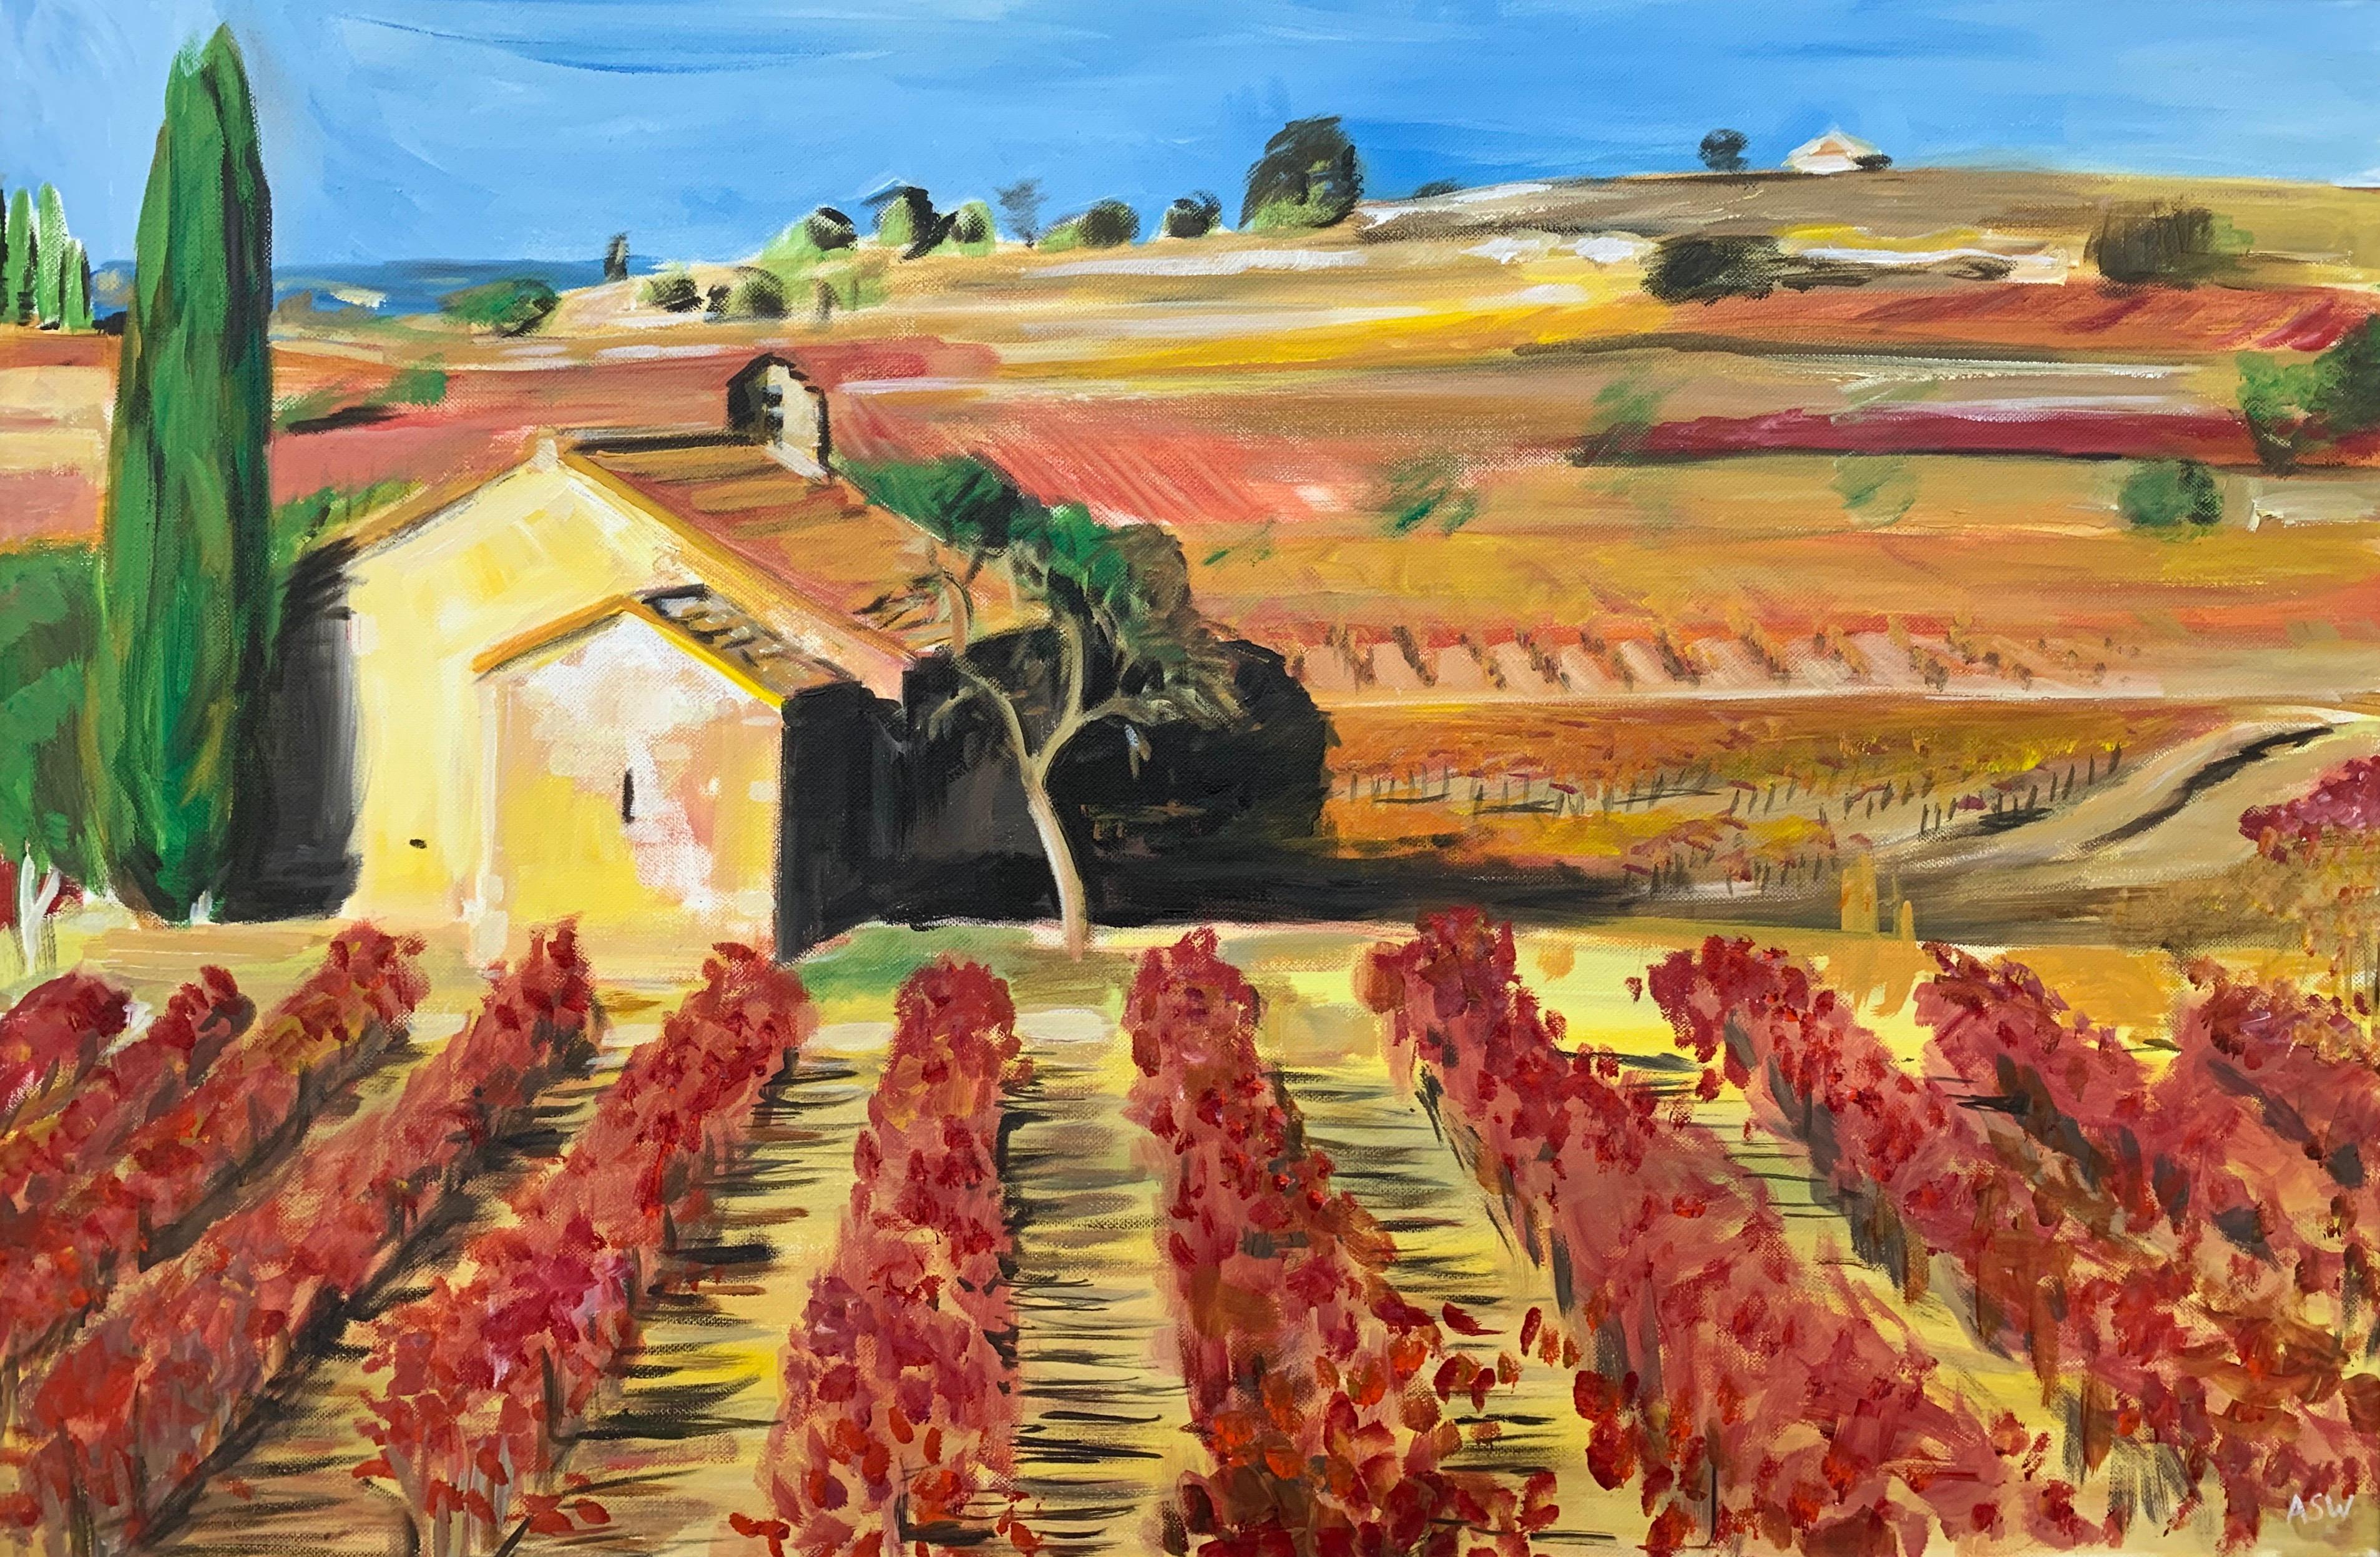 Original Painting of a Vineyard in the Wine-Growing Region of Bordeaux, France, by leading British Contemporary Landscape Artist, Angela Wakefield. During 2012, Angela embarked upon her European Series, which initially focuses on the unique